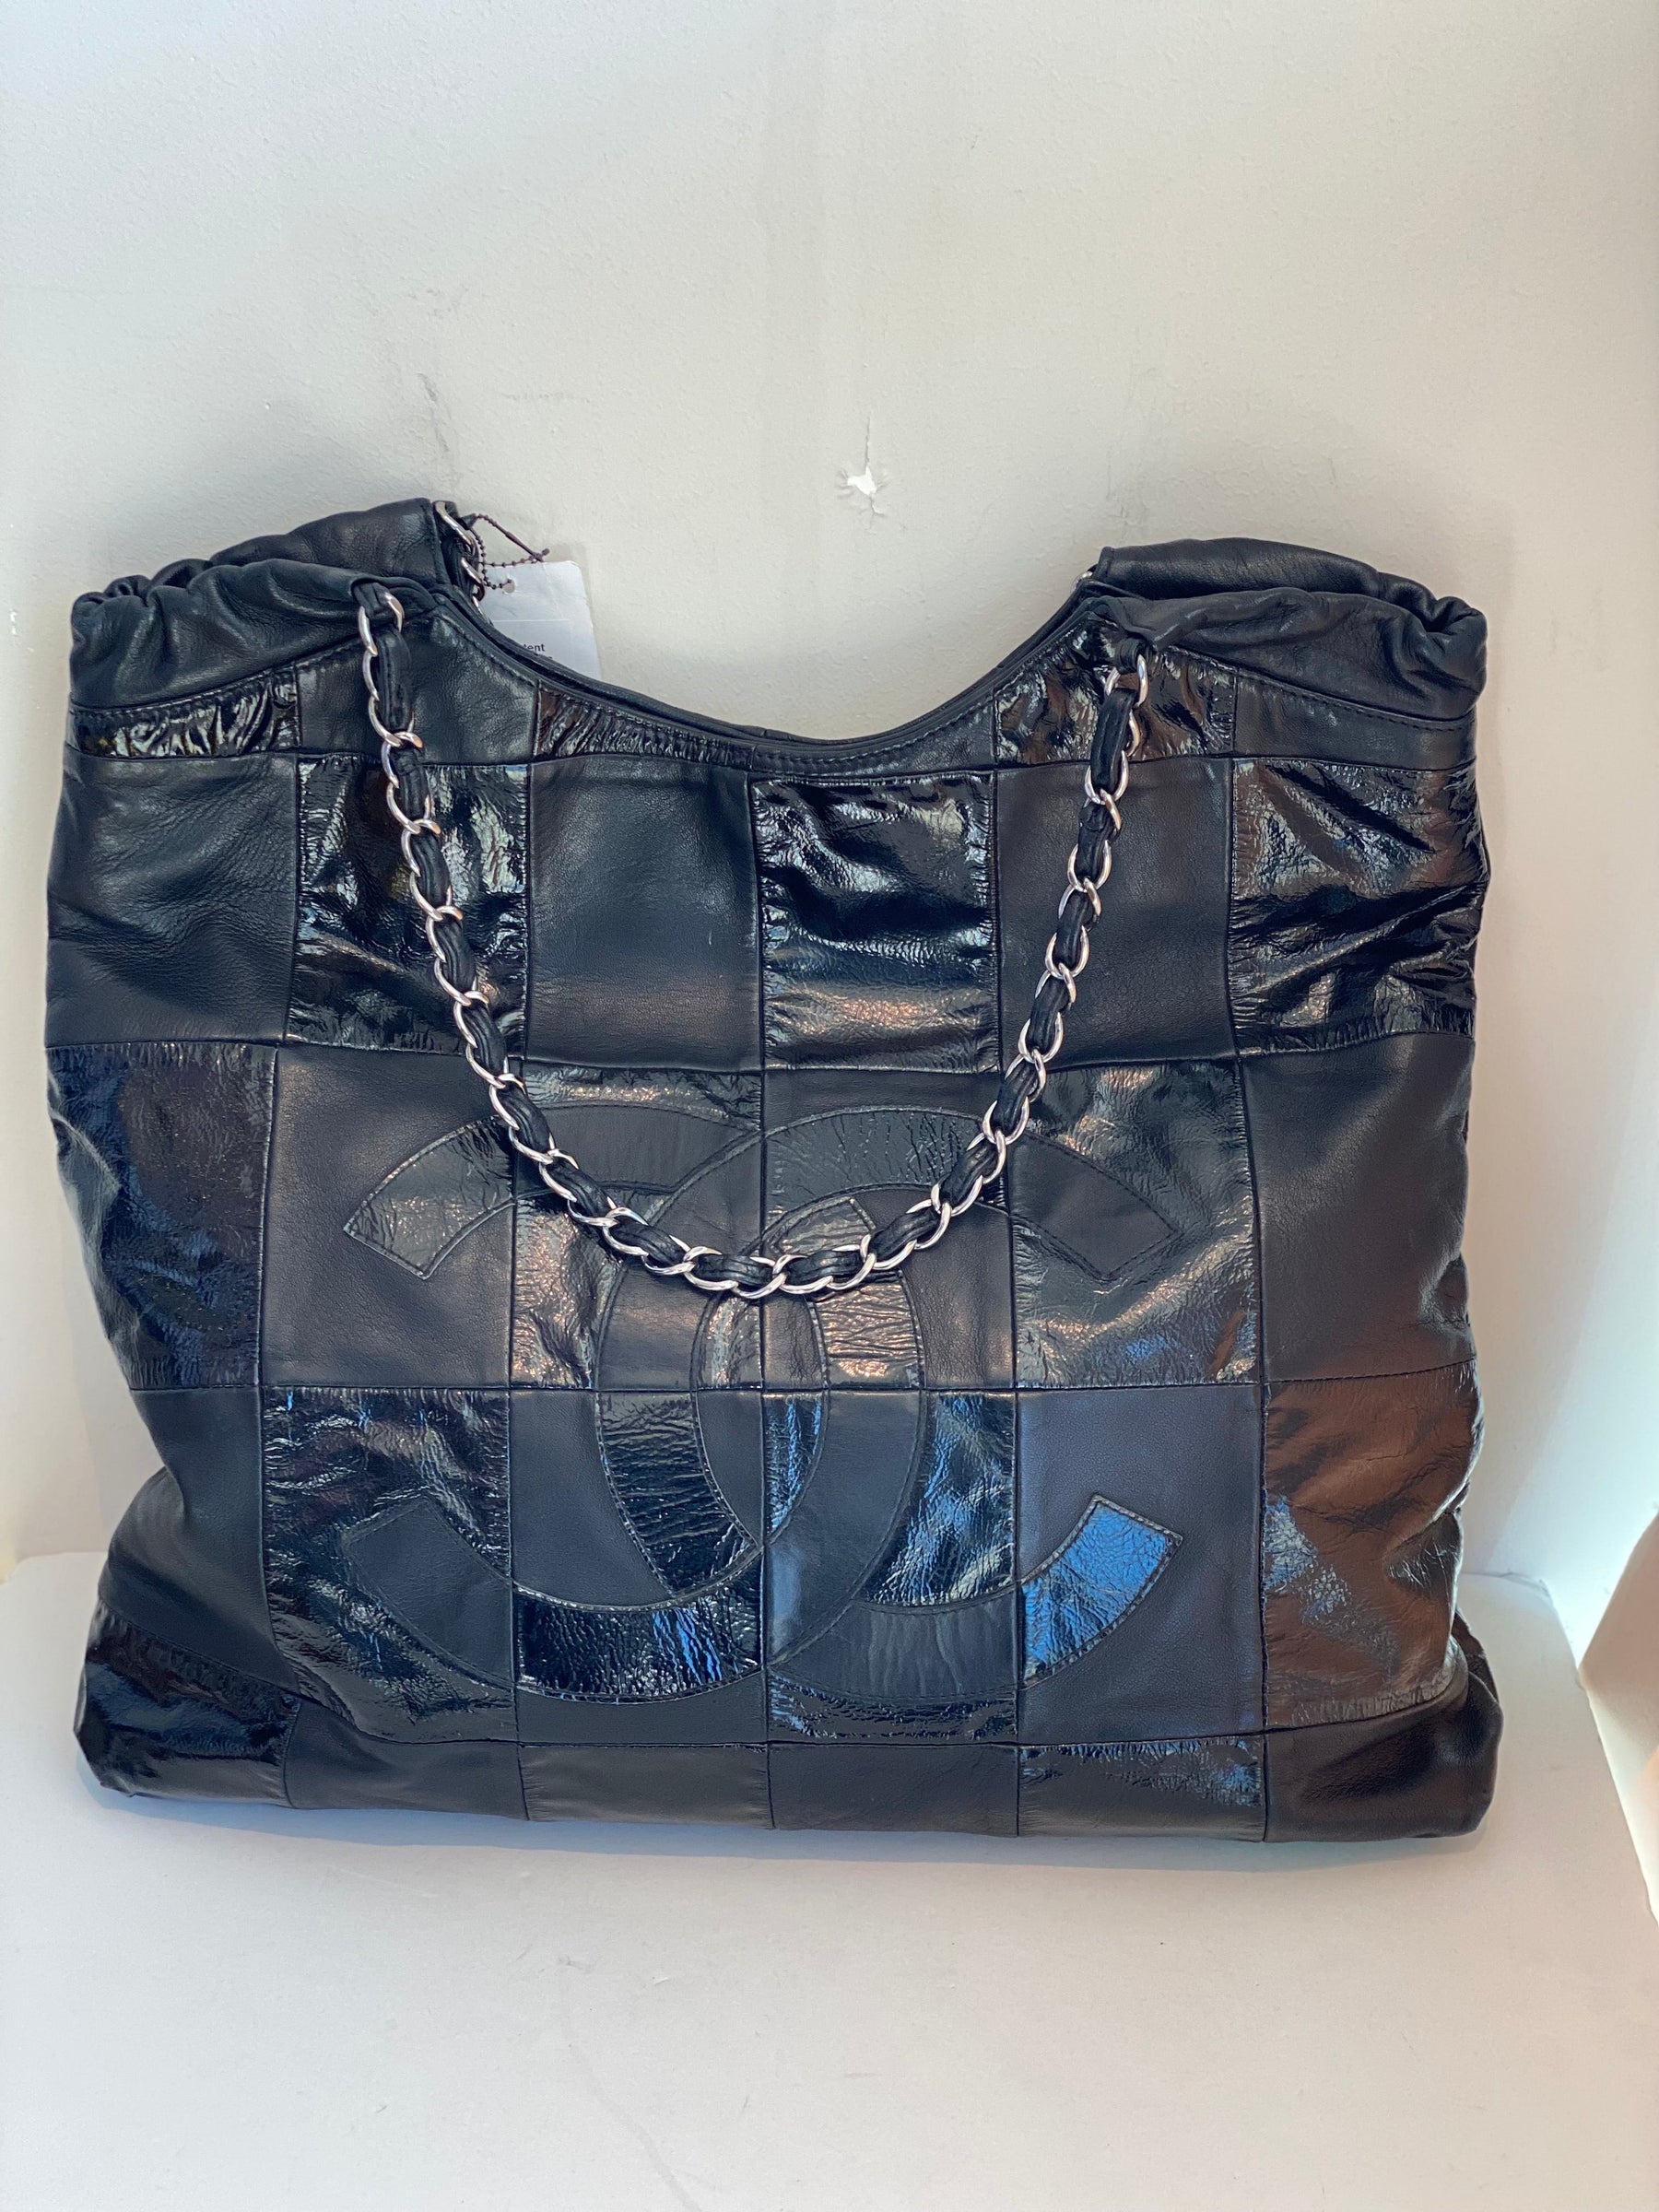 Chanel Large Patchwork Brooklyn Cabas Tote